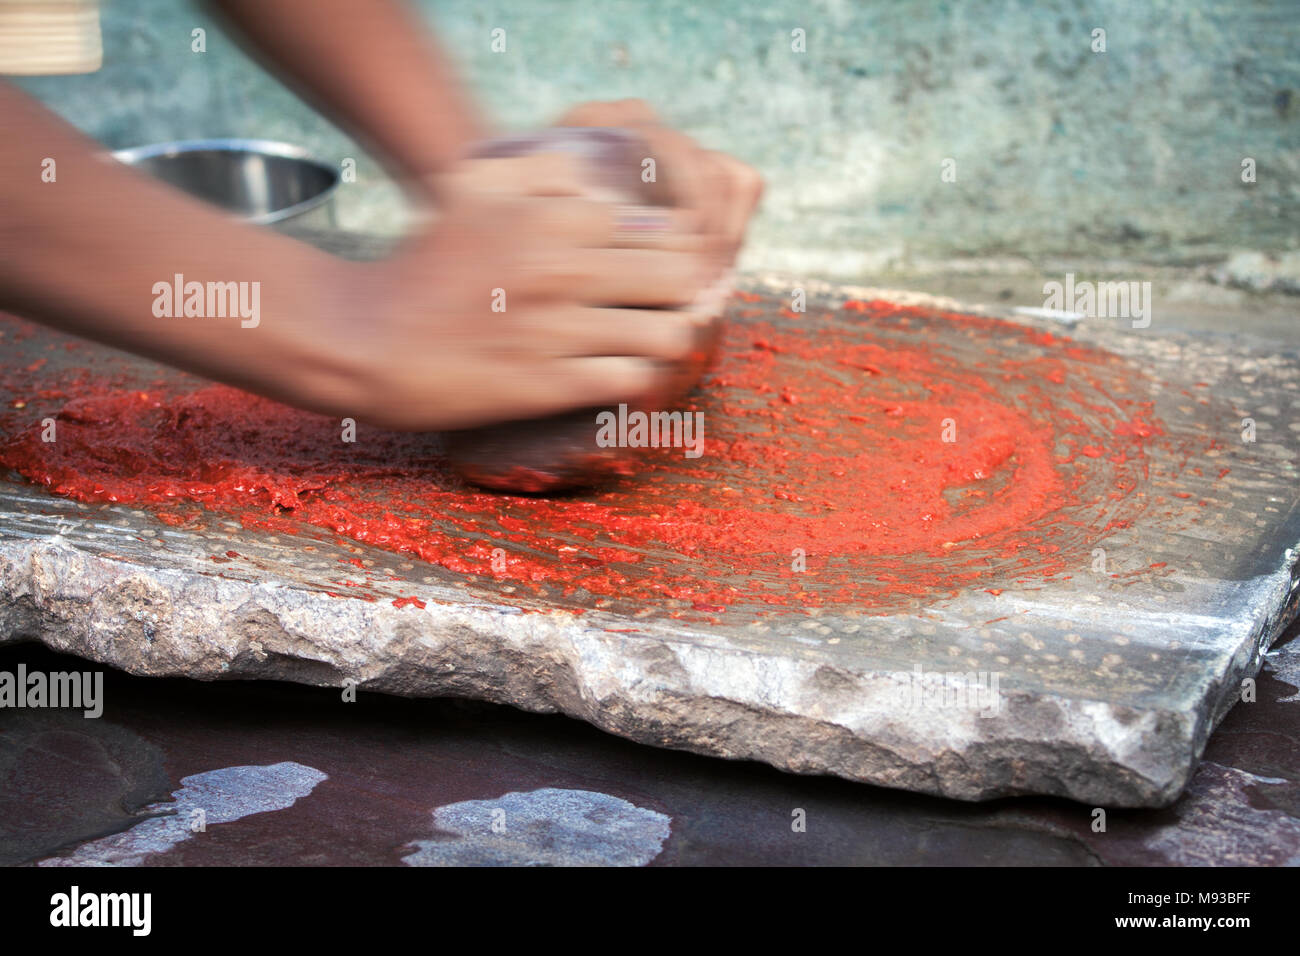 Chilli Paste in the making, motion blur hands. Indian girl preparing condiment using grinding stone to grind red chillies into a Chili Paste in India Stock Photo